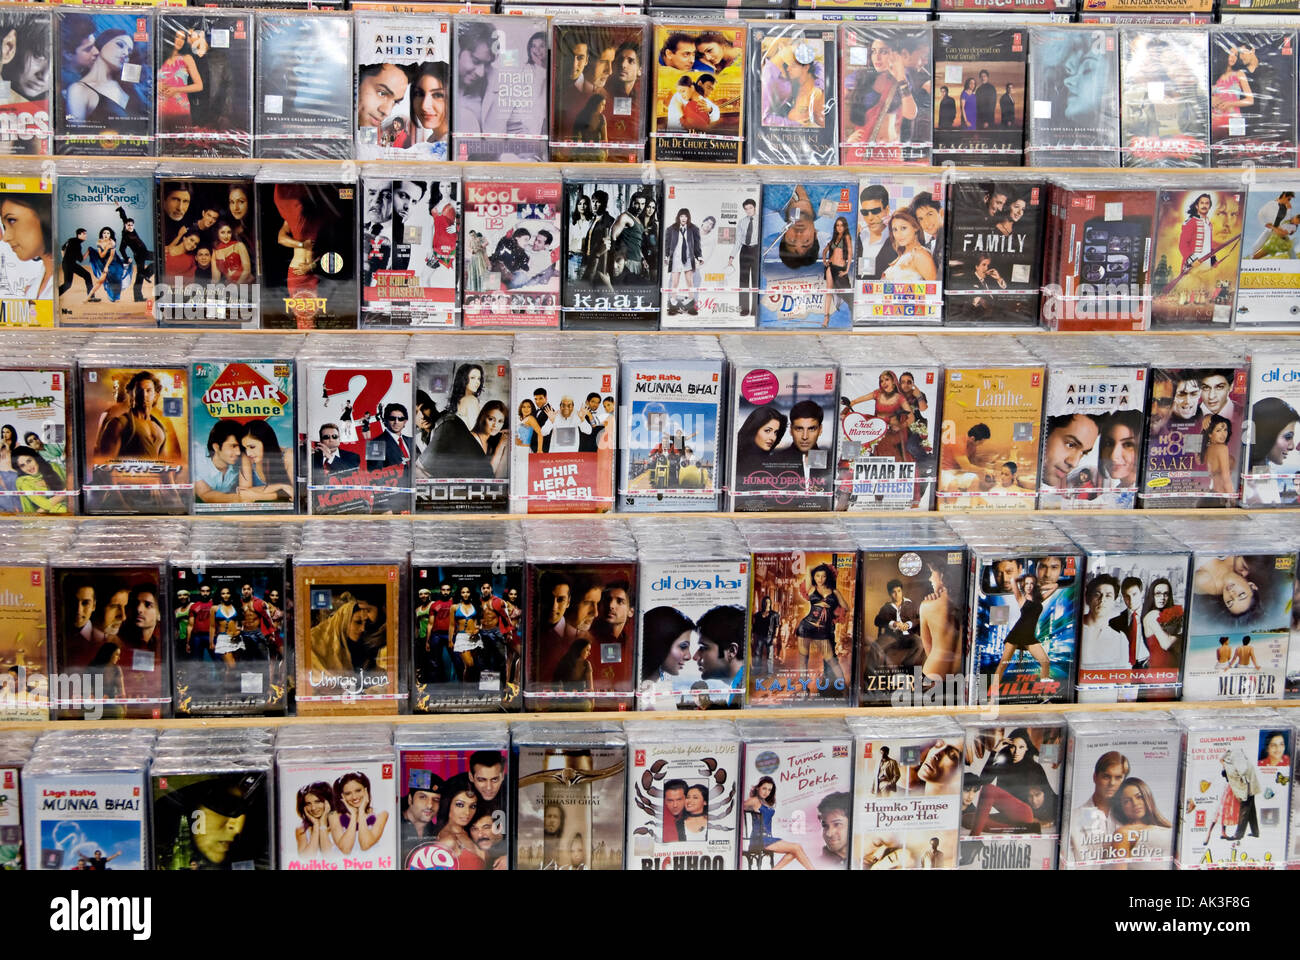 rows of asian music on tape and cd lined up in the traditional style often found in most asian music retailers in the uk Stock Photo